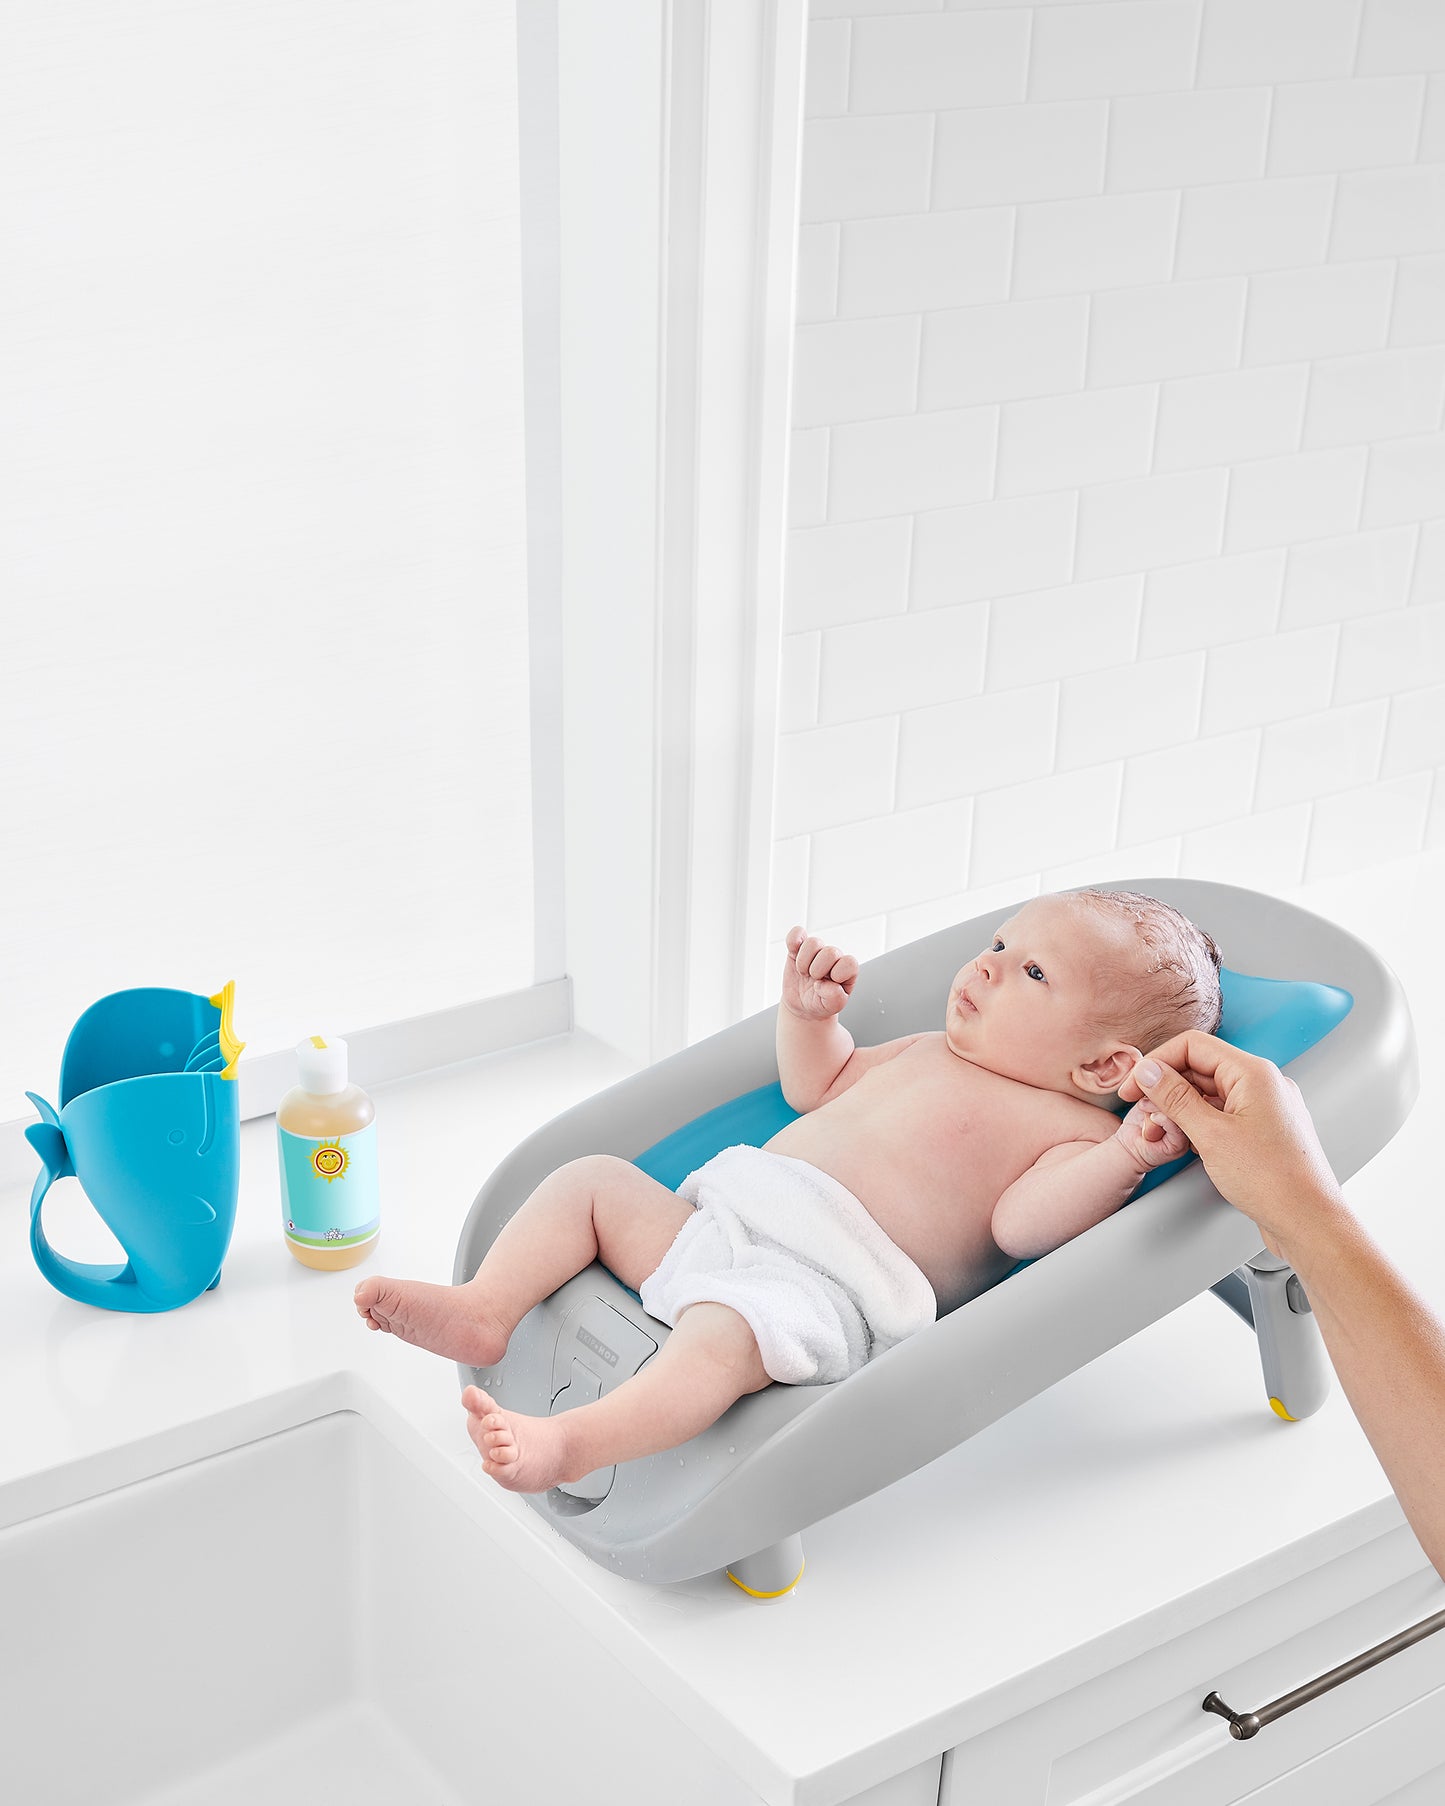 Skip Hop Multi Moby Recliner & Rinse Bather